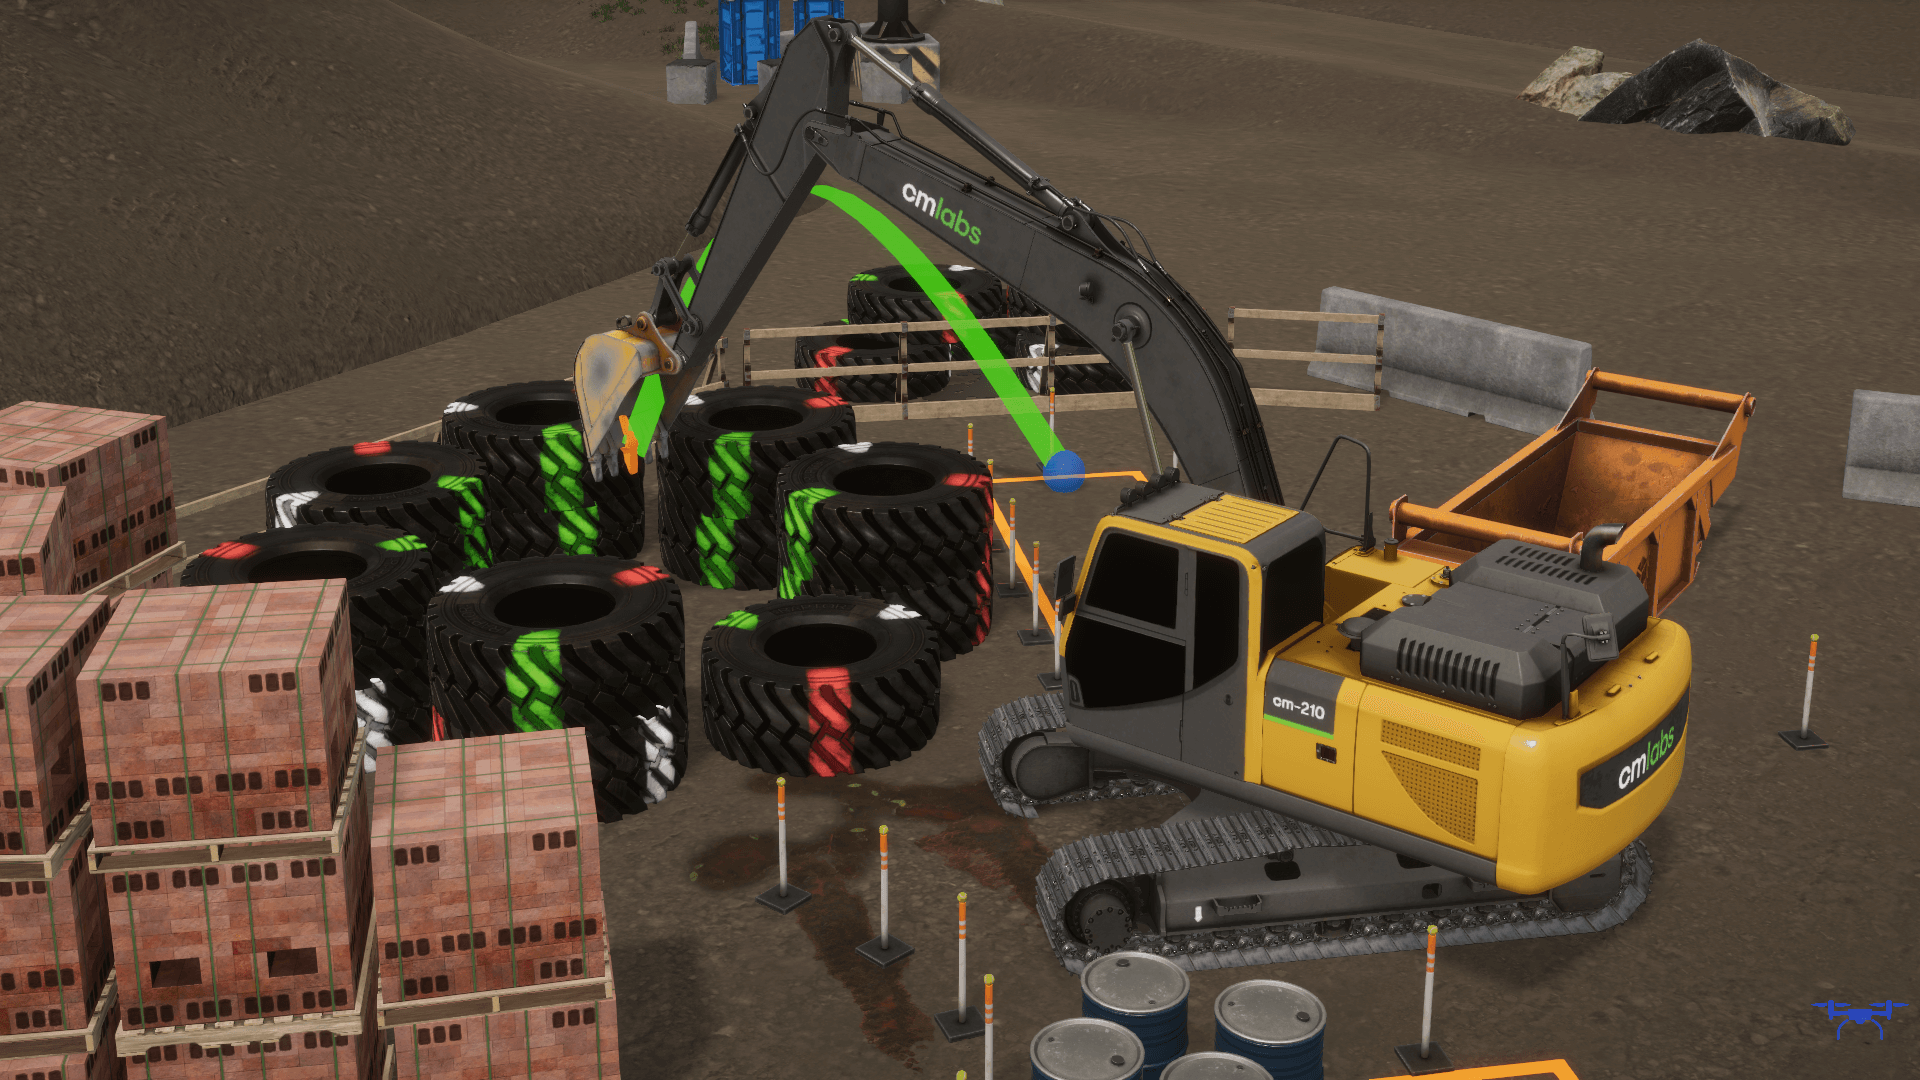 Excavator-simulator-training-exercise-Arc-Swipe-over-tires-into-a-specific-zone-1.png